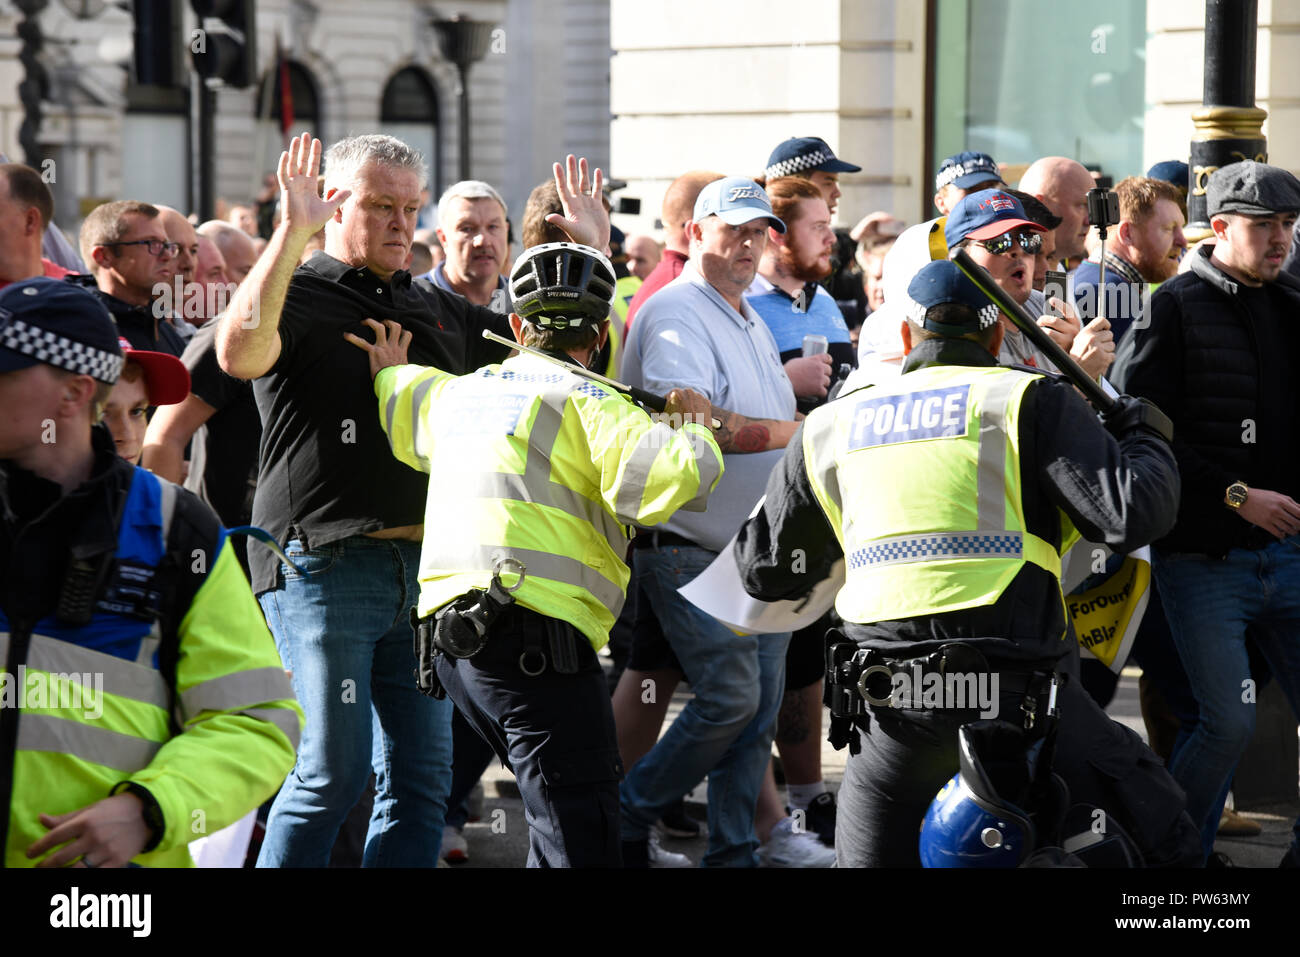 Democratic Football Lads Alliance DFLA marching towards Parliament, London, in protest demonstration. Marchers broke through a police cordon and scuffles took place Stock Photo